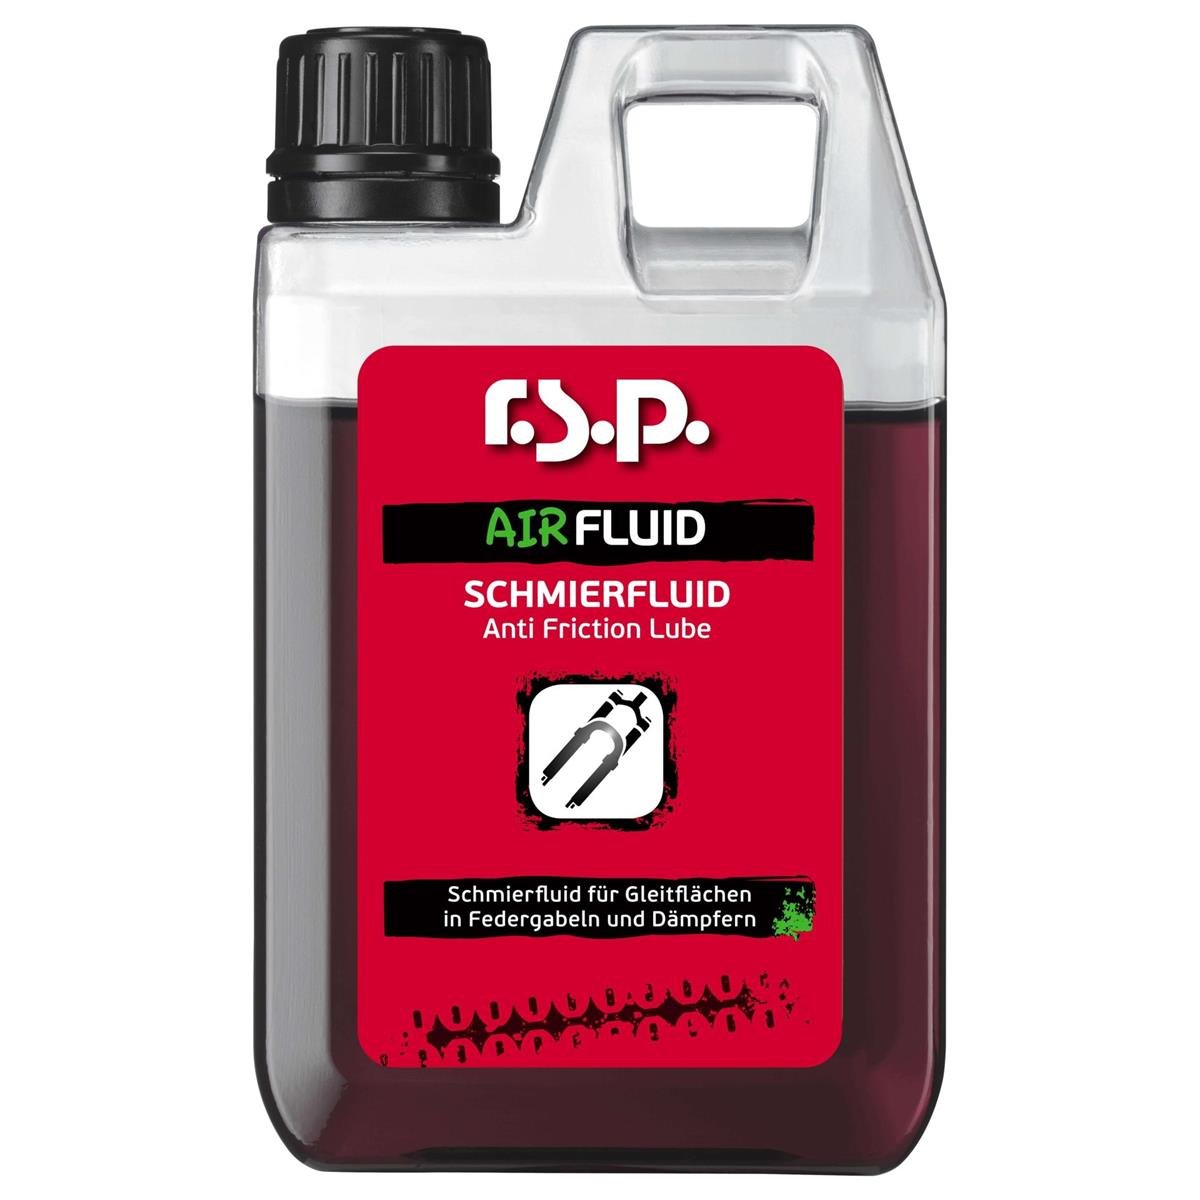 r.s.p. Anti Friction Lube Air Fluid for Forks and Rear Schocks